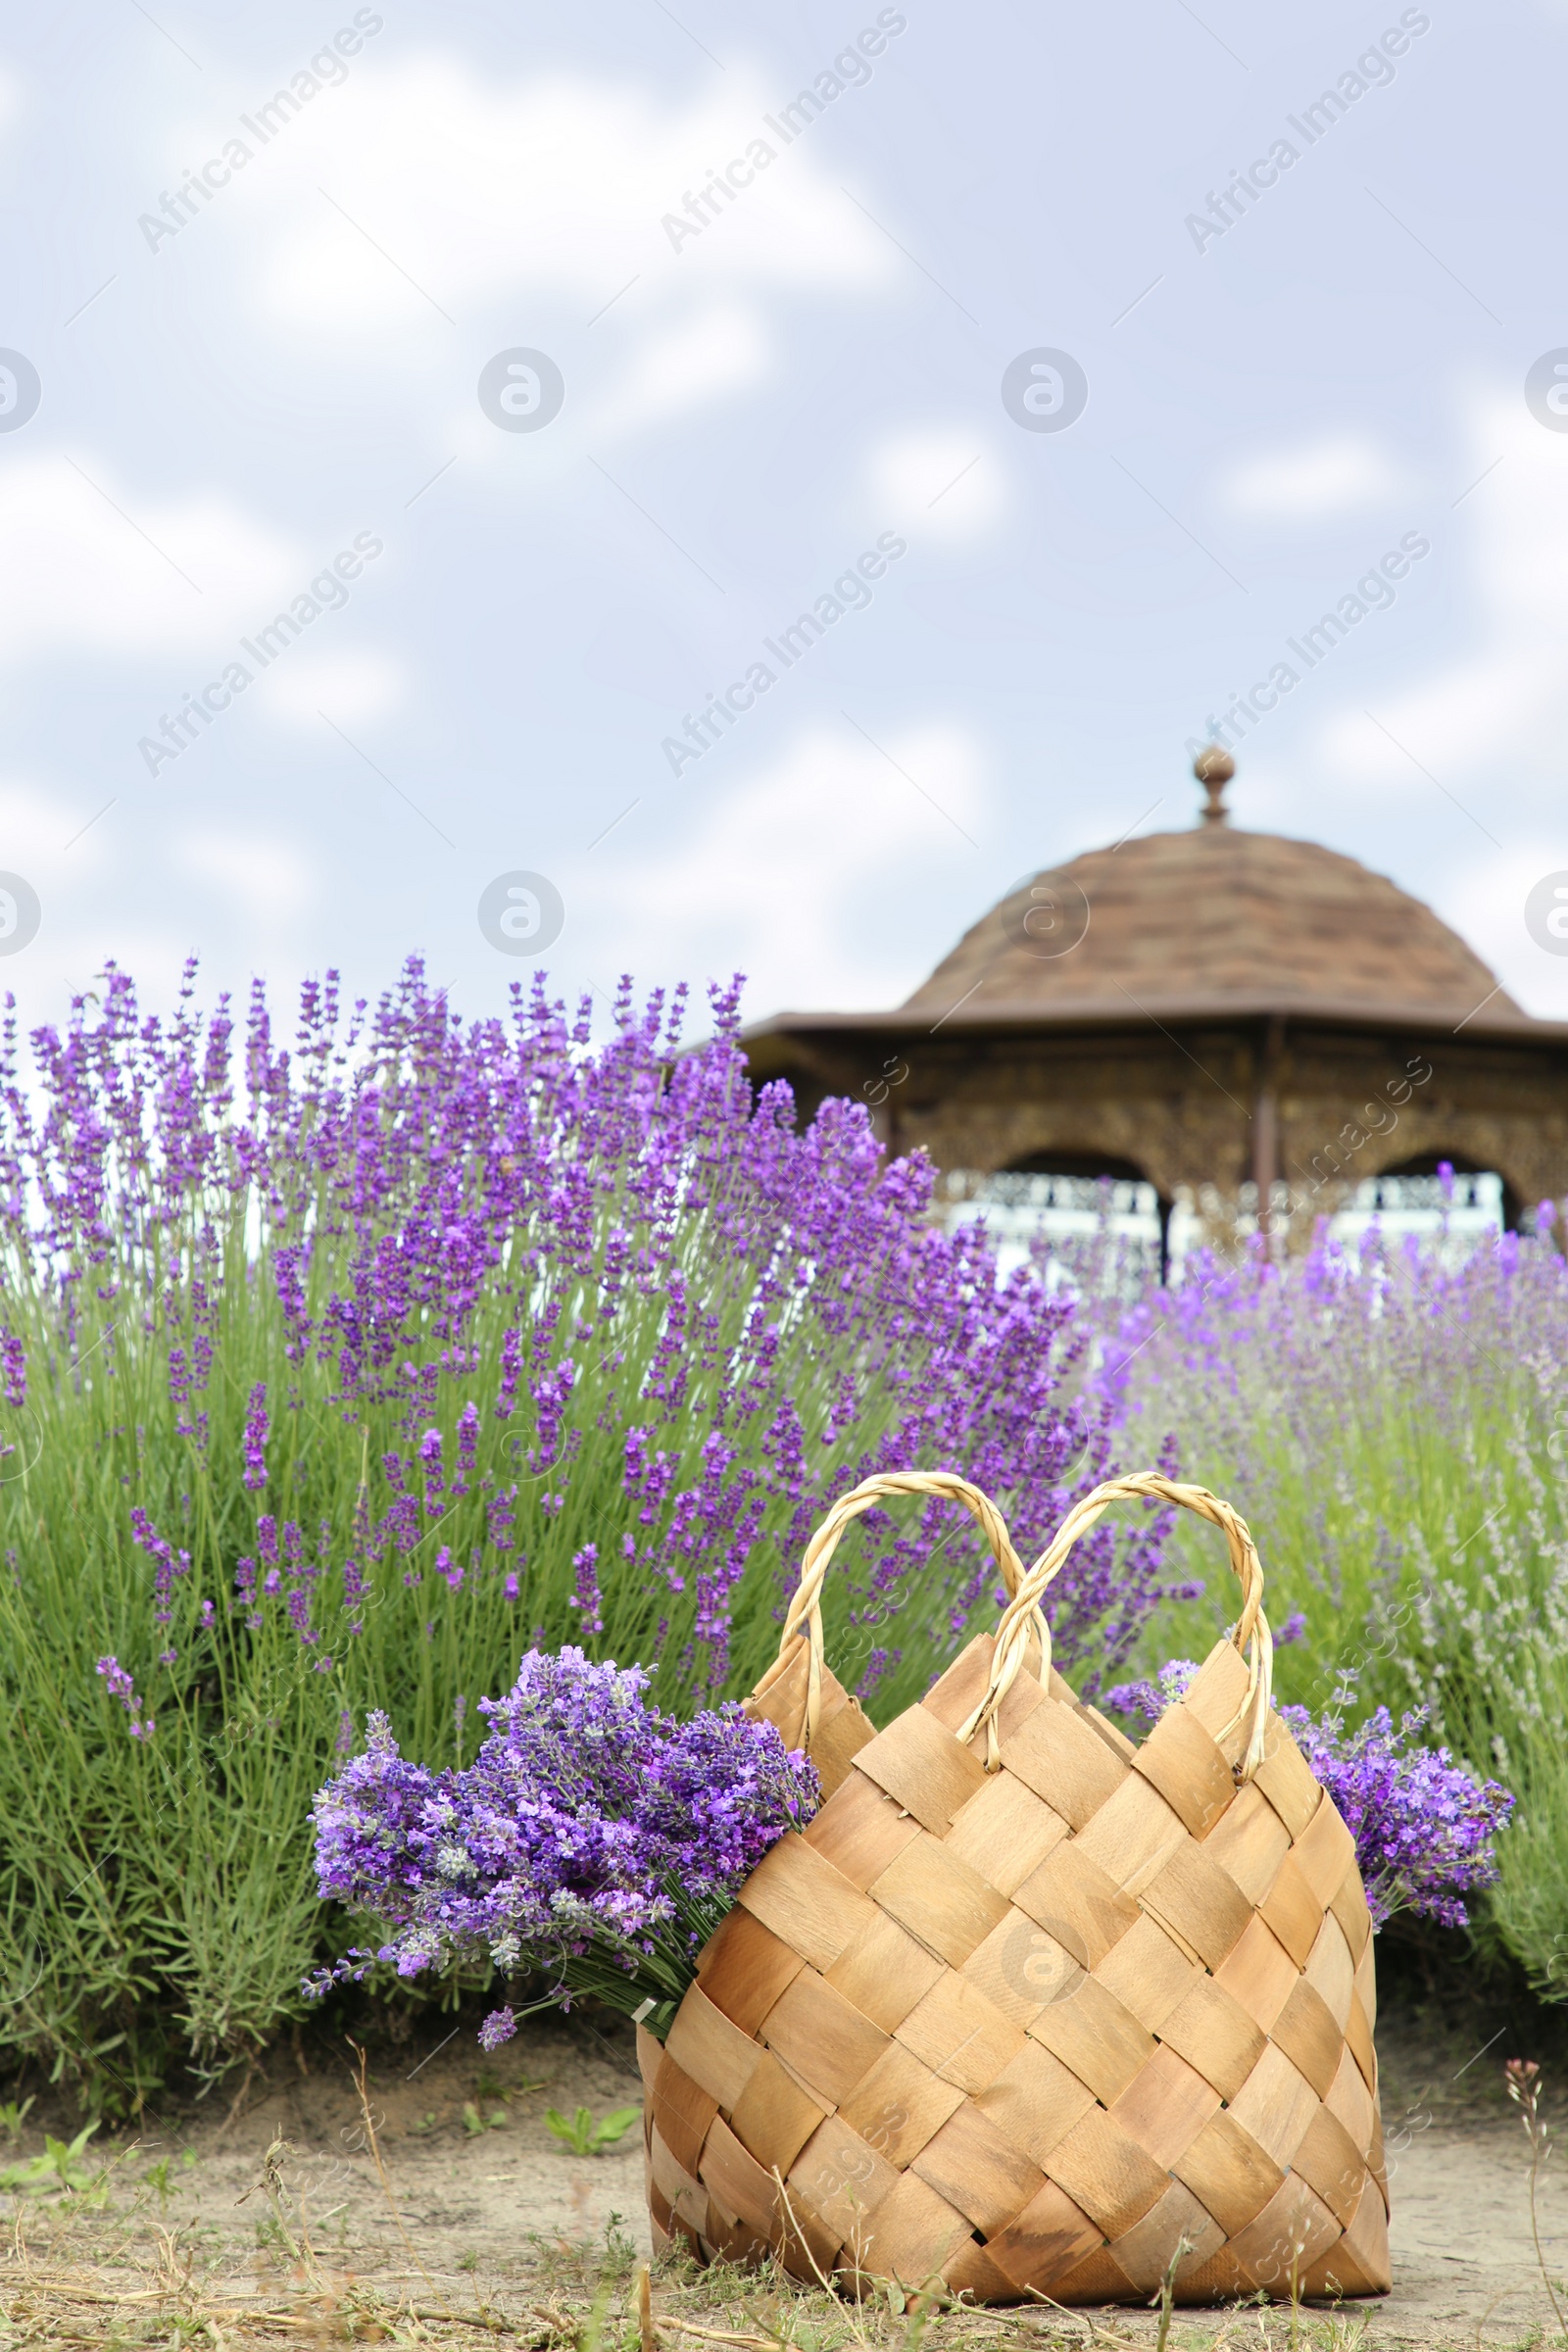 Photo of Wicker bag with beautiful lavender flowers near bushes outdoors